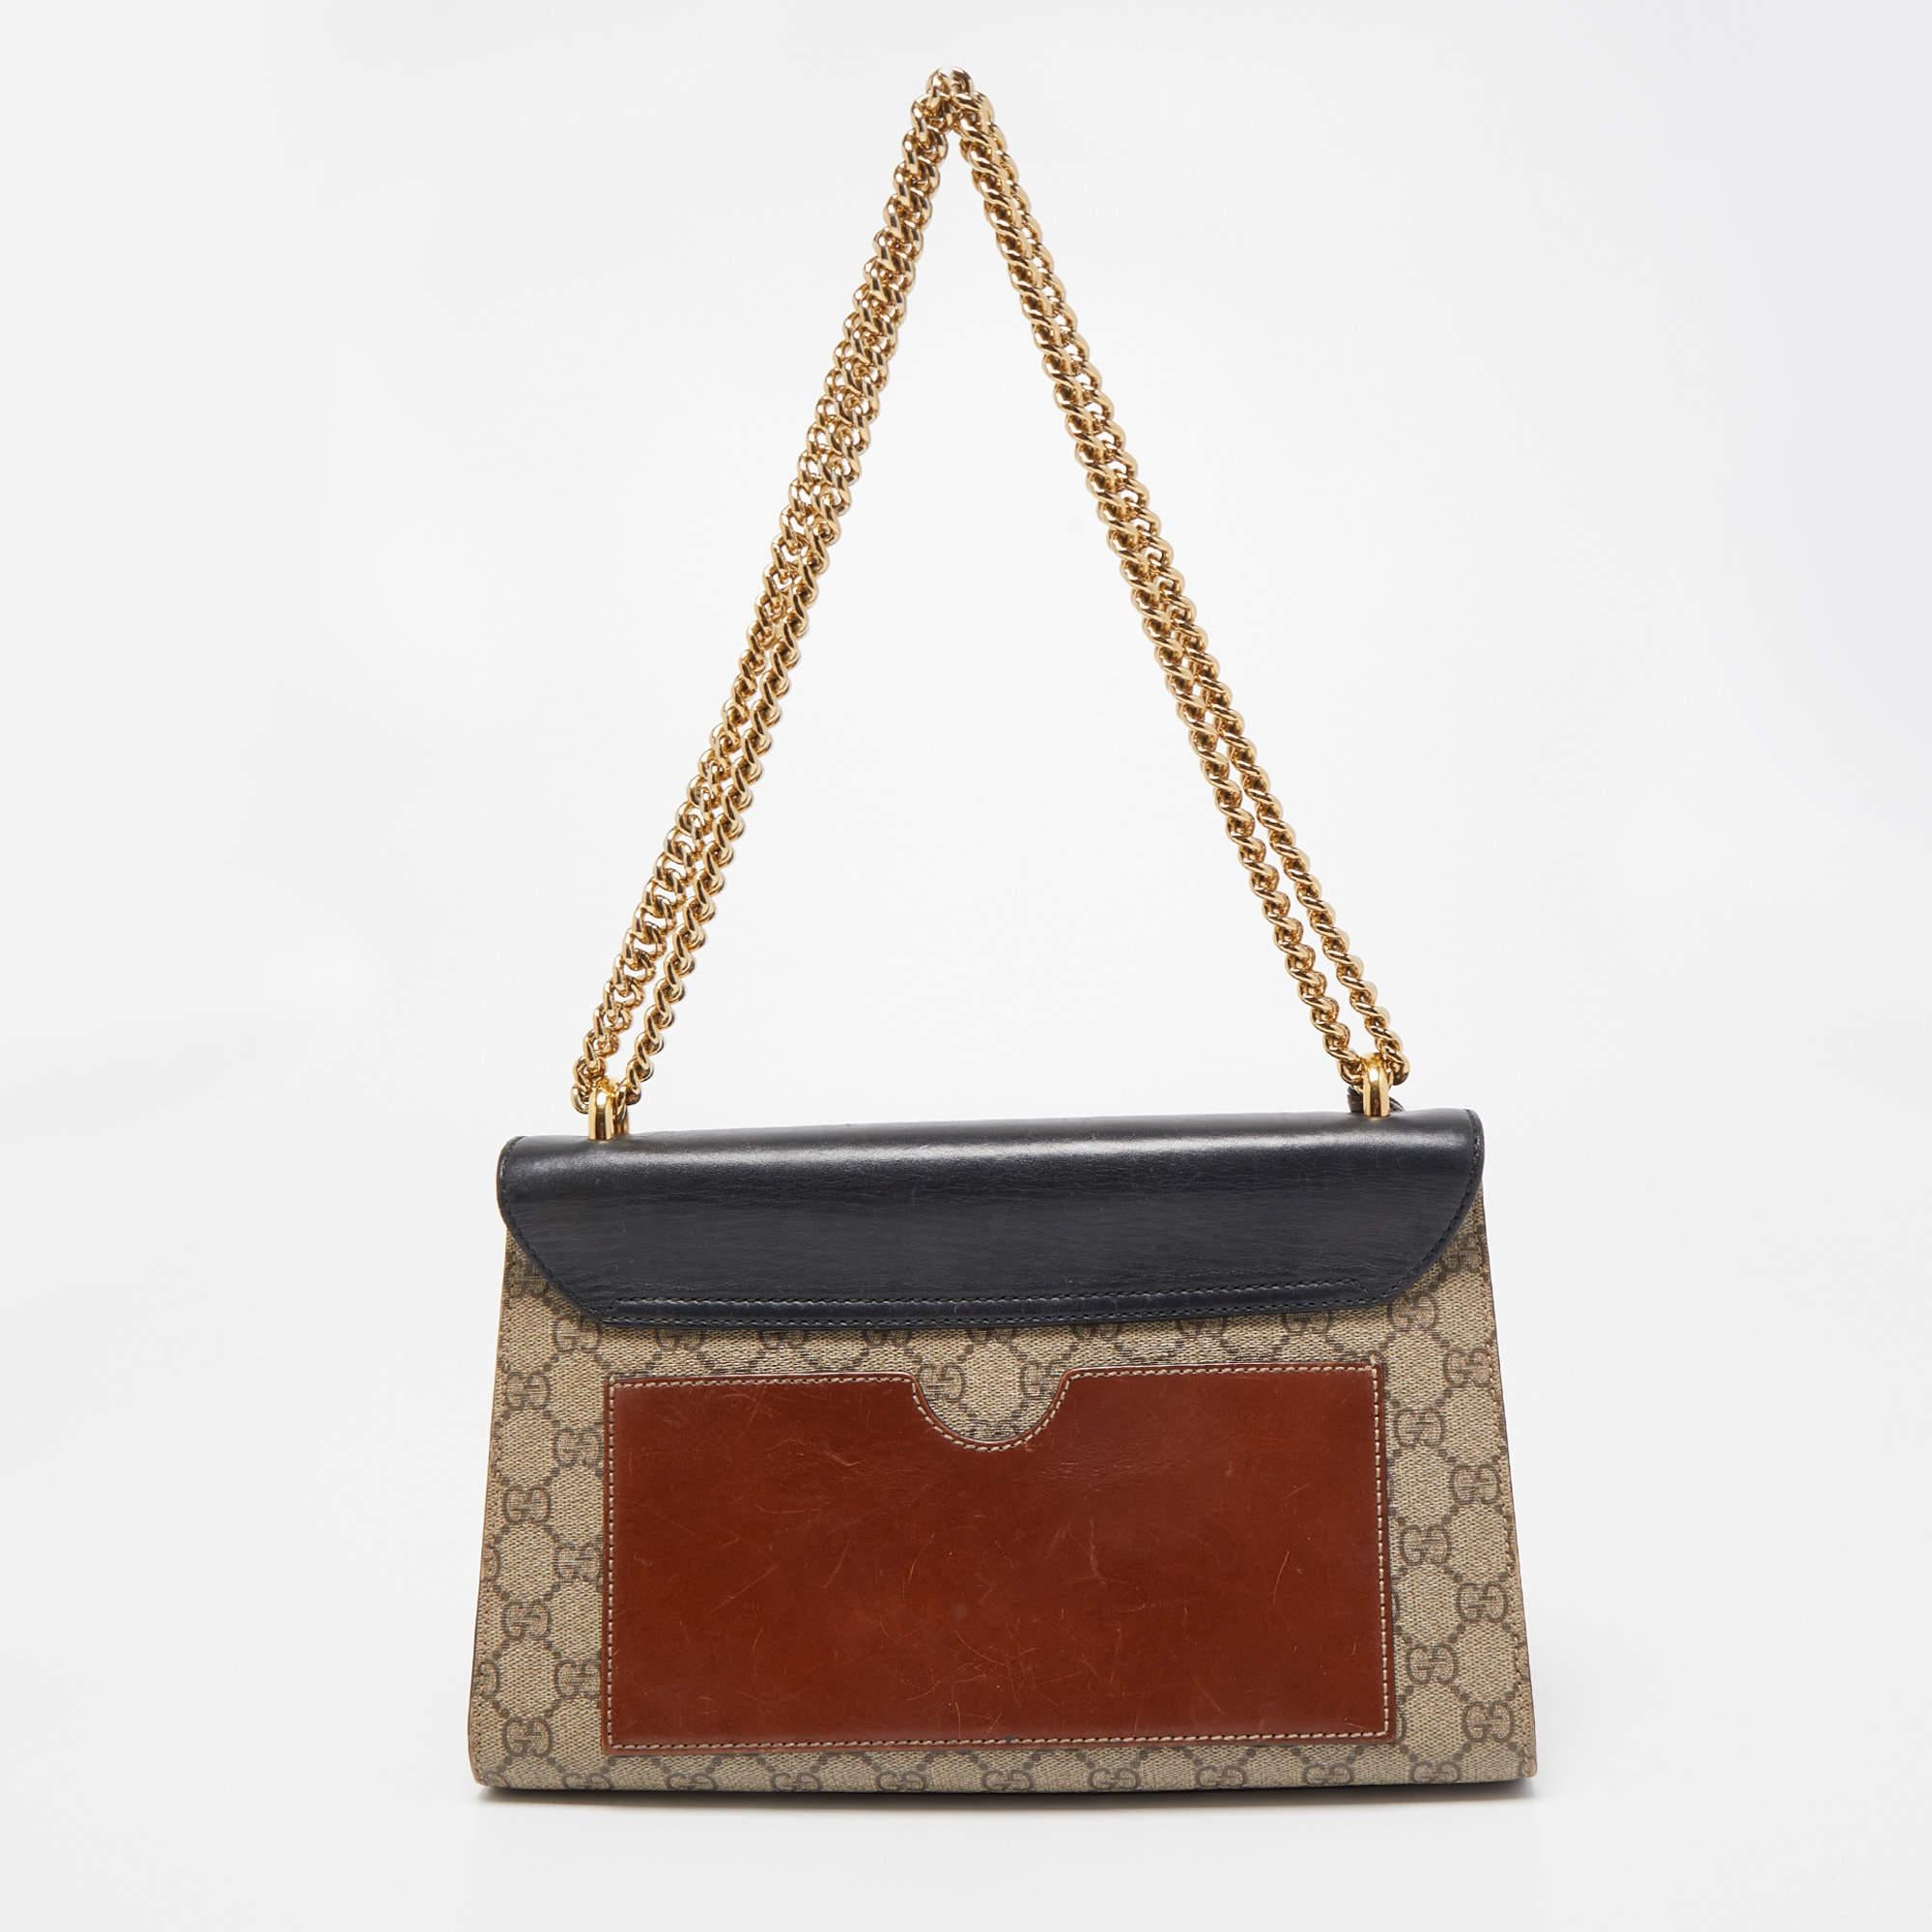 Carry everything you need in style thanks to this Gucci padlock shoulder bag. Crafted from the best materials, this is an accessory that promises enduring style and usage.

Includes: Original Dustbag, Info Booklet, Keys
